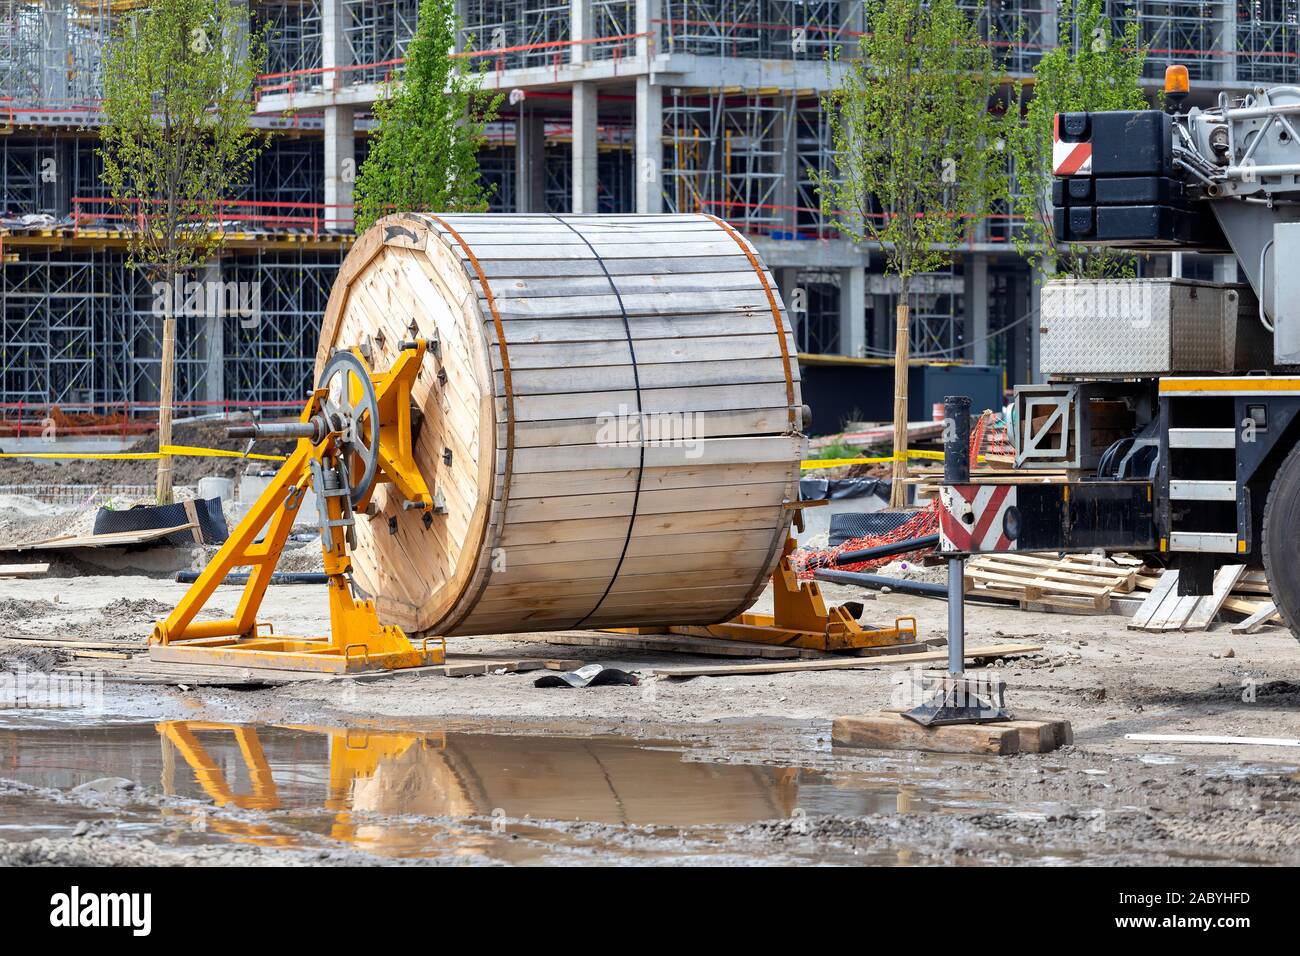 Construction site with big cable drum. Wooden coil of cable